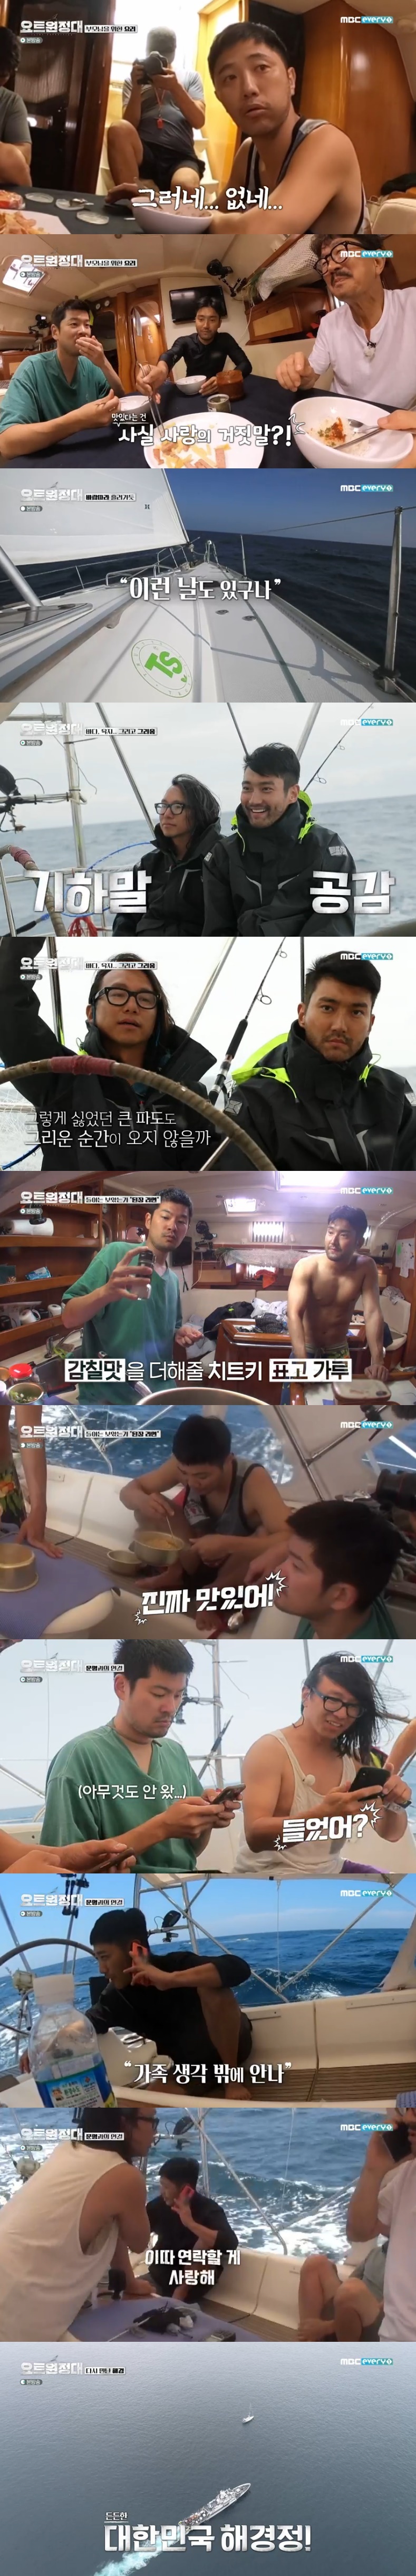 Seoul = = The Yot Expedition, which decided to return to rough waves, returned to Jeju Island.Jin Goo, Choi Siwon, Chang Kiha, Song Ho Jun and Kim Seung-jin arrived safely at Jeju Island in MBC Everlon entertainment program Yot Expedition broadcast on the afternoon of the 5th.Jin Goo made a fond-hearted Confessions in a phone conversation with his wife, who had missed him; those who made a comeback to Korea begin another experience.Crewes sat around the cabin and ate calmly: Have you ever cooked like this and made your parents do it? Everyone became fascinated by Choi Siwons words.I replied that there was no Chang Kiha, and Jin Goo, who was next to me, was shocked and said, Oh, I have never really done it. No. I have to go and do it.They only realized a lot of things as they sailed; Chang Kiha said: I just want to stand on a ground that doesnt move.It is possible to stand without giving strength and not having to catch it anywhere. Among them, Song Ho-joon said, I think I will miss the sea air, wind, and horizontal line when I go to land, and I will miss the big waves that I thought I would hate so much.Captain Kim Seung-jin said, It is a great meaning for me to give a little taste of the sea to new people. I do not think it would be better to find fun instead of adventure of yachts for the rest of the year.Kim Seung-jin later informed him that the future is 44 miles to Jeju Island, it will enter within six hours; the yacht expedition cruised.Chang Kiha, Choi Siwon became busy: sharing opinions with breakfast menus; Choi Siwon expressed confidence, saying, I have a good opinion on ramen.The menu was miso noodles; Chang Kiha took out the shiitake powder that had been prepared in advance and added a rich flavor; Choi Siwon admired the soup flavor and praised it as great.Crewes admired the taste of soup and live noodles, and poured out favorable comments on miso ramen.The members were excited when their cell phones started bursting. Song Ho-joon laughed when he heard the text messages.Jin Goo said, I told my family that I would not be able to contact them, but I did not contact them like this.He soon made a phone call with his wife, who said, Now Im in Korea territorial waters, and Jin Goo said, I miss you so much, here I just think of my family.Ill call you later. I love you. At this time, the Korean maritime government appeared and escorted the yacht expedition. Kim Seung-jin explained, It is about an hour later.The crew went into each room and began to organize their luggage. Kim Seung-jin folded the sail just before Jeju Island arrived.The crew, who returned from rough winds, felt strangely emotional: Kim Seung-jin said: There is no decision that was not made in the world, its all a good decision.The first goal was lost, but the second goal did not happen. I think it was good for me to turn and show the pleasure of the yacht. On the other hand, next weeks broadcast will show Crewes to find sound and enjoy various experiences.